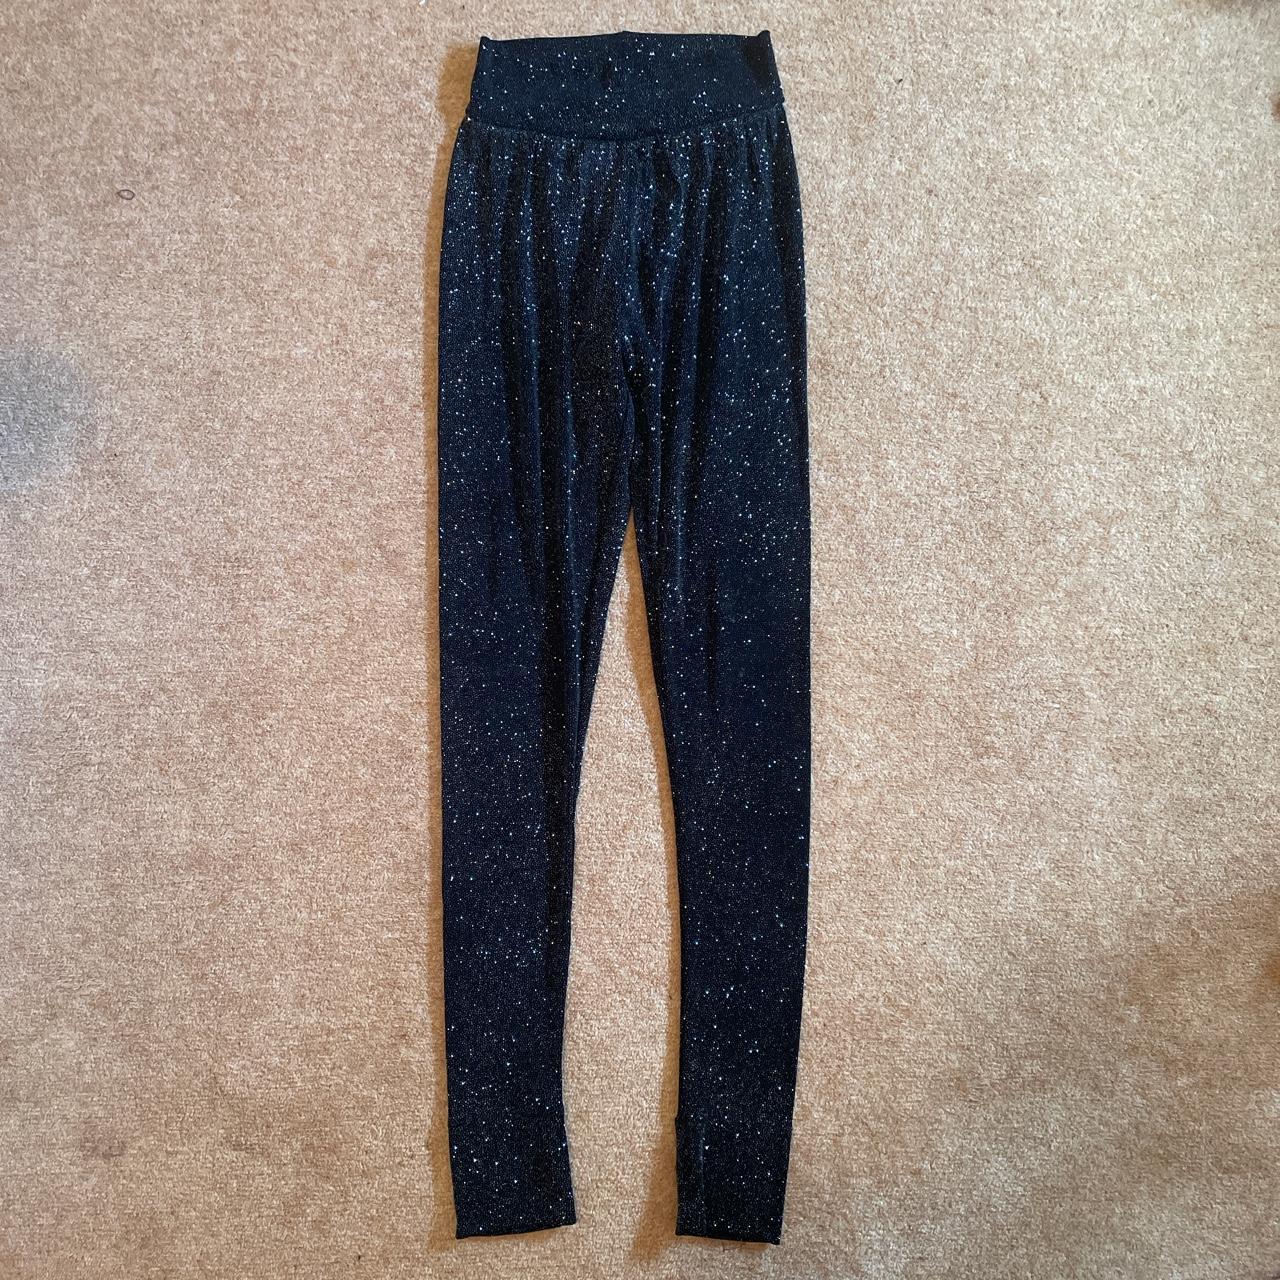 Vivienne Westwood anglomania silver sparkly... - Depop